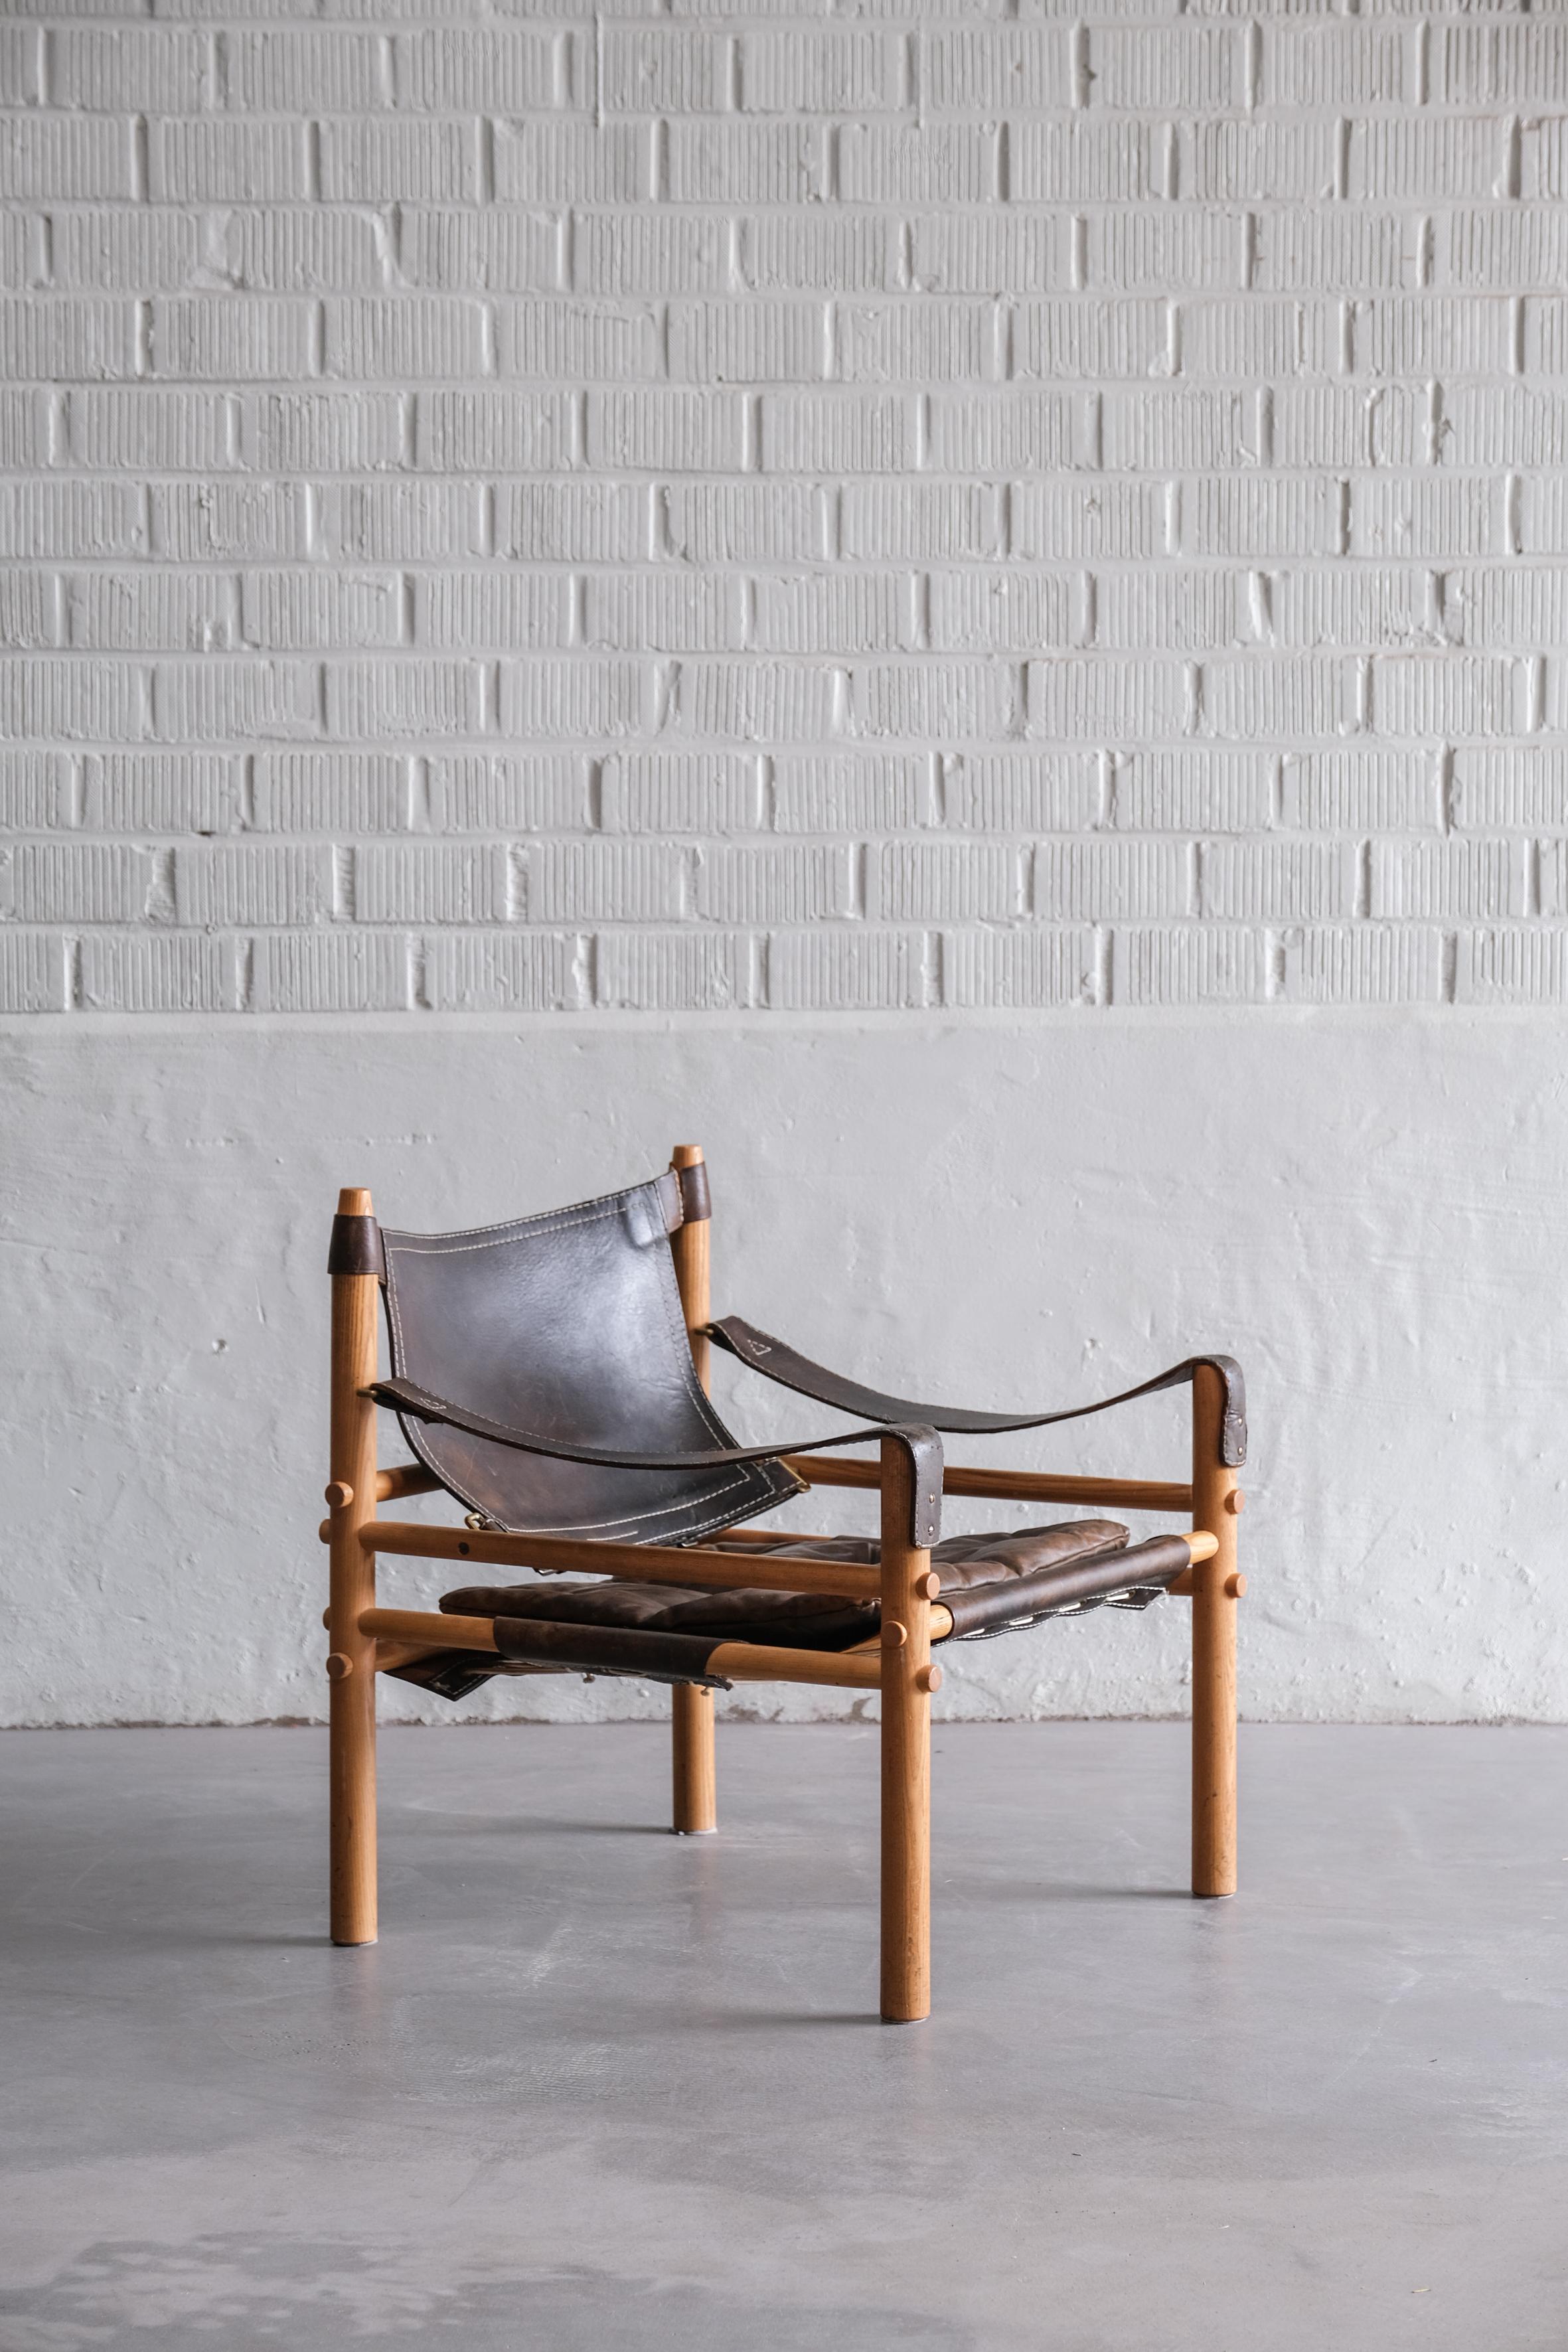 Original Arne Norell safari chair with beautiful patinated leather. 
Made out of wood, a few screws and leather. 

